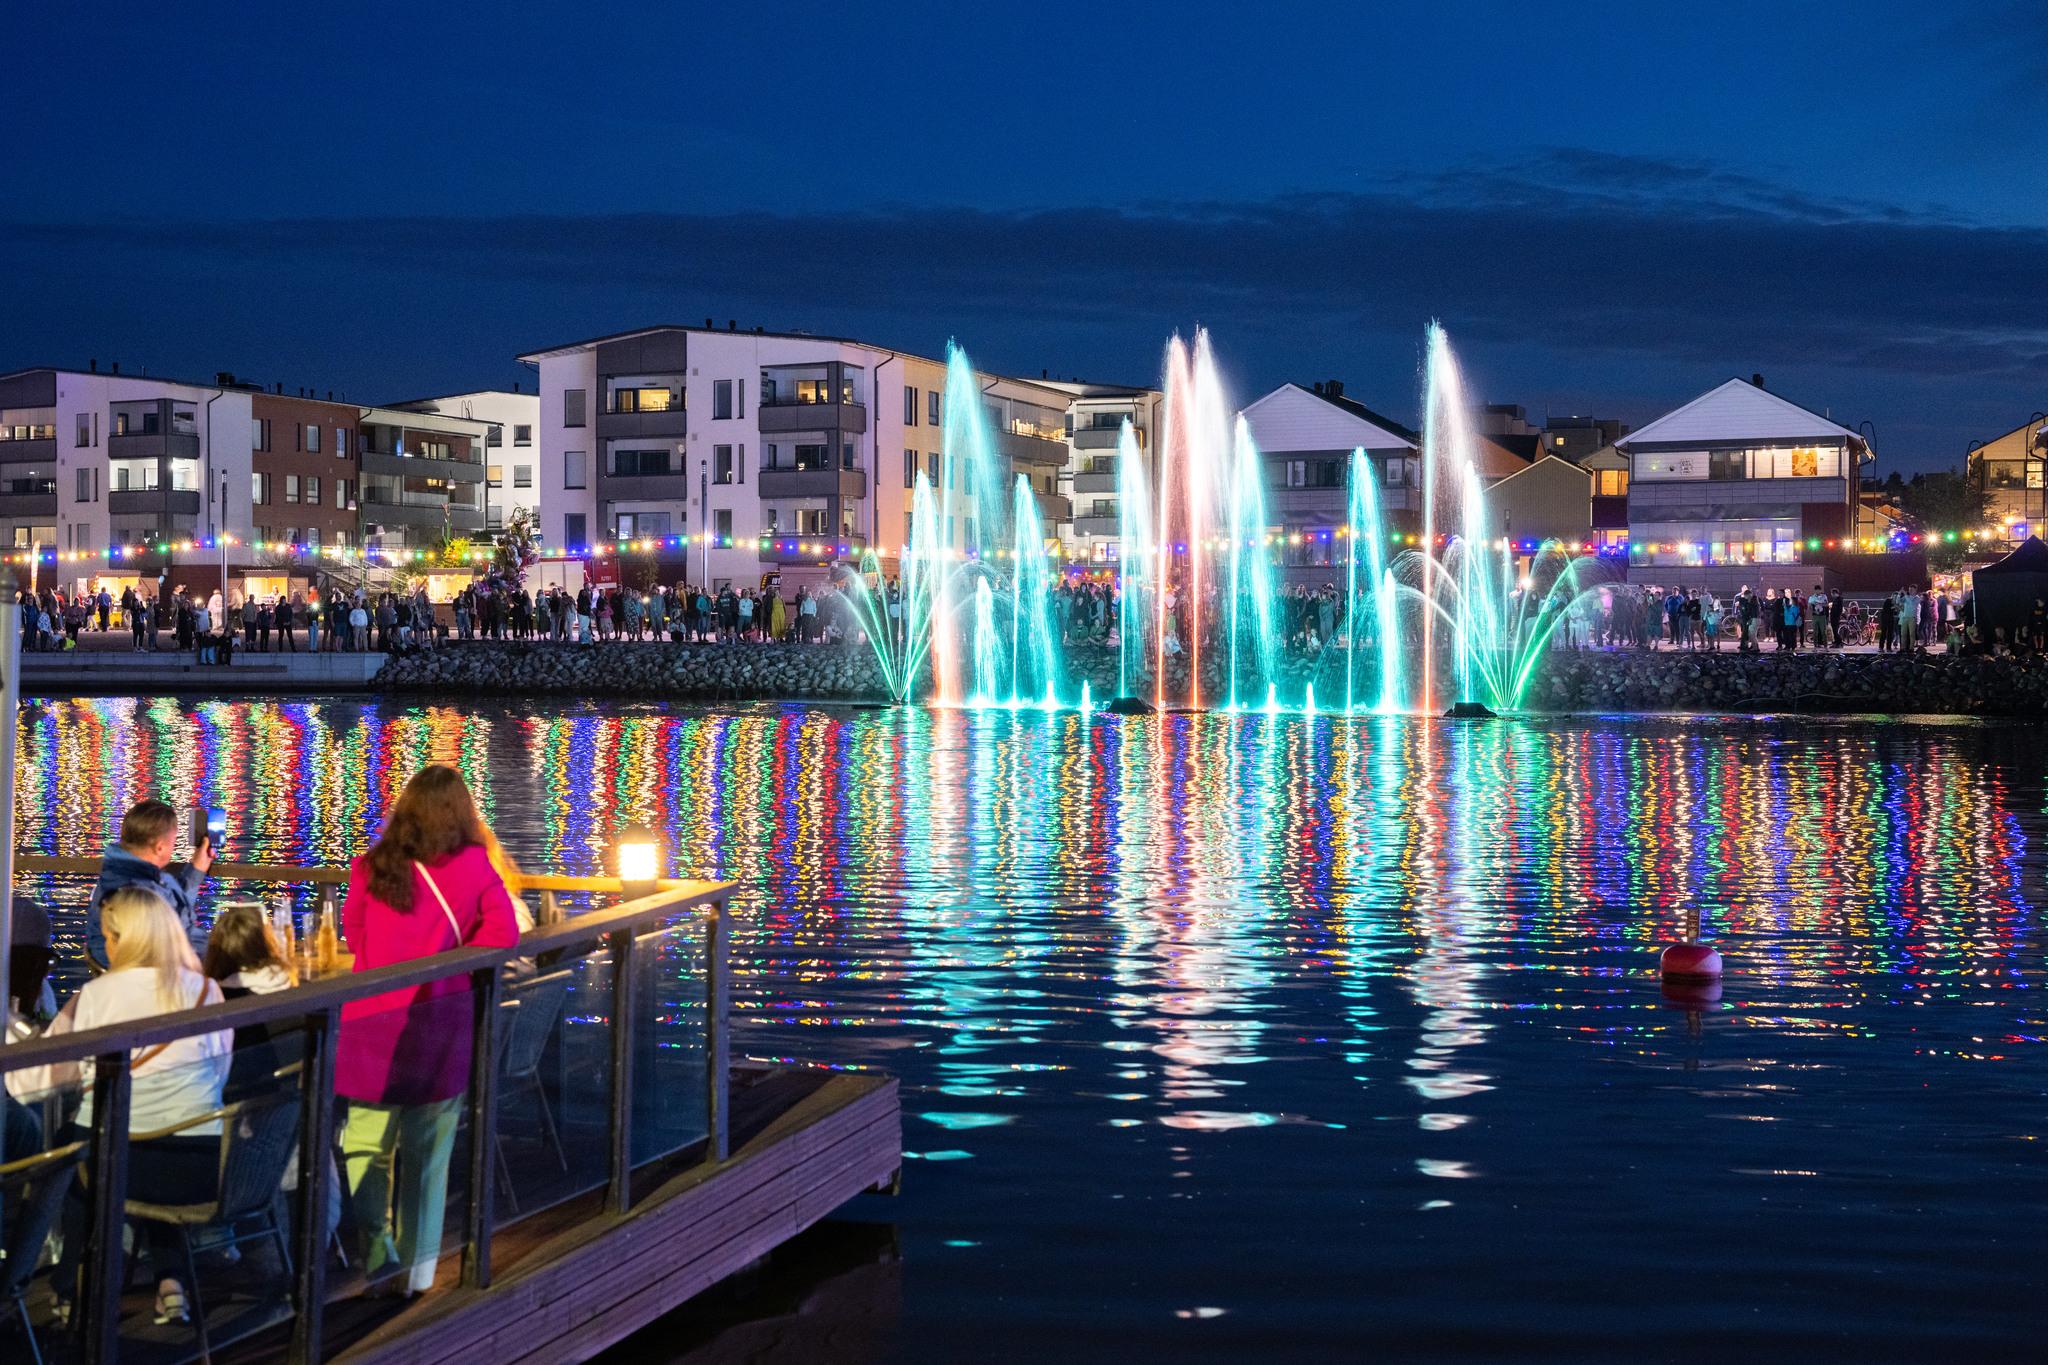 Dancing fountains show and colorful lights reflecting on the river.